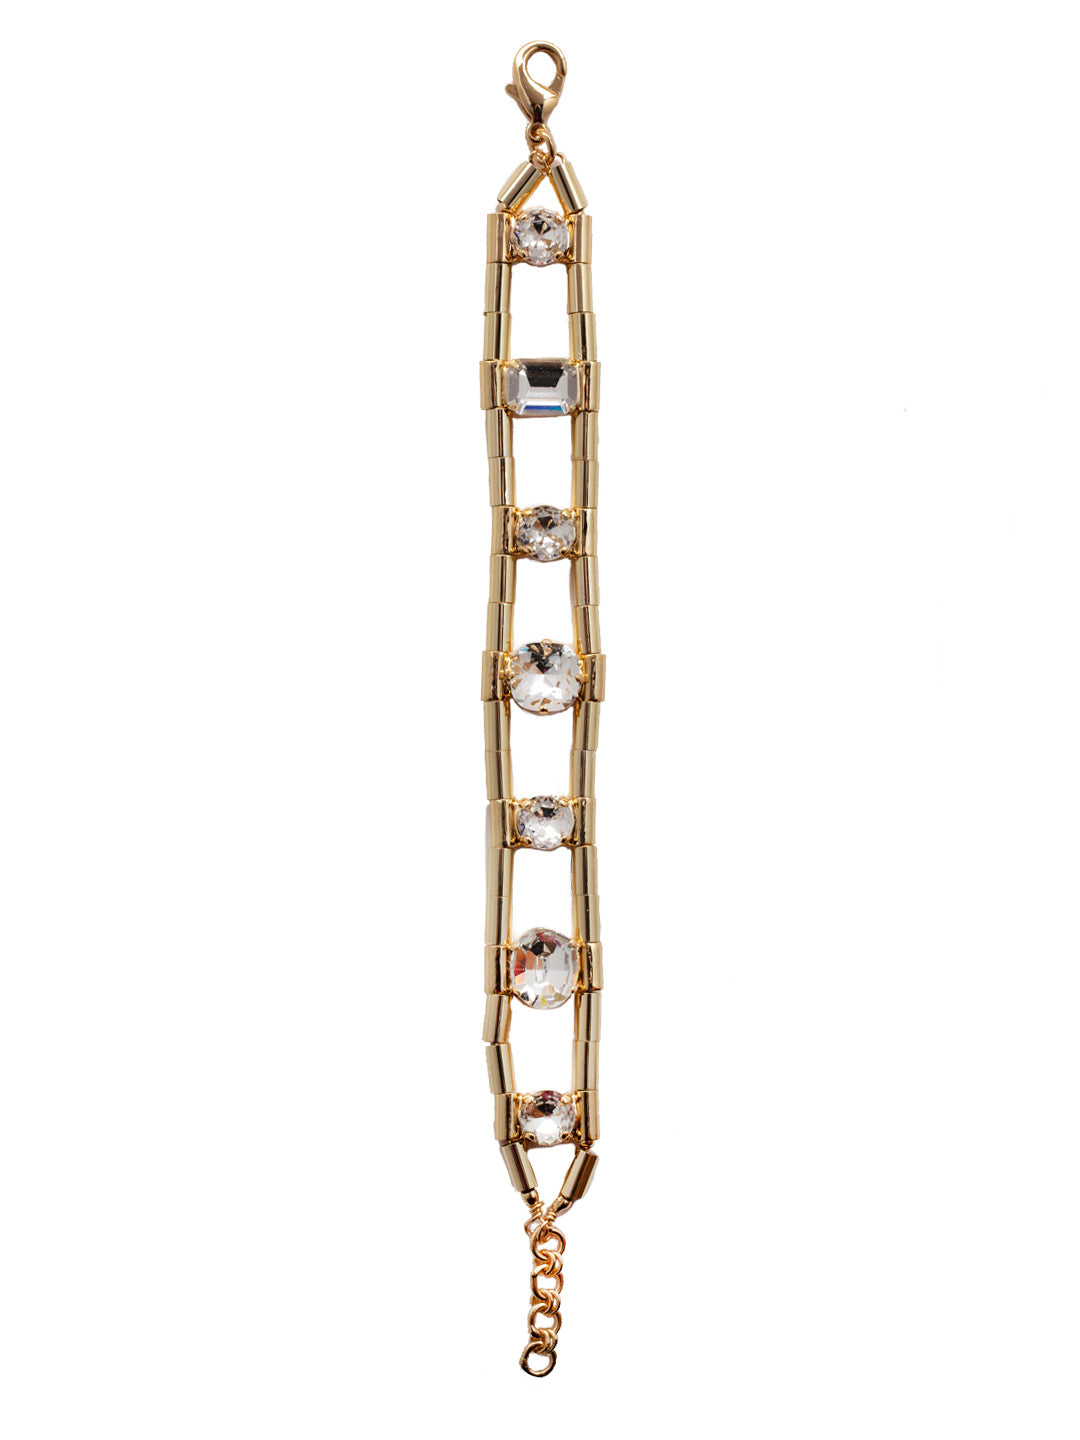 Janelle Tennis Bracelet - 4BEZ4BGCRY - <p>The Janelle Tennis Bracelet features a line of assorted cut crystals between two lines of tube bar chains, secured with a lobster claw clasp. From Sorrelli's Crystal collection in our Bright Gold-tone finish.</p>